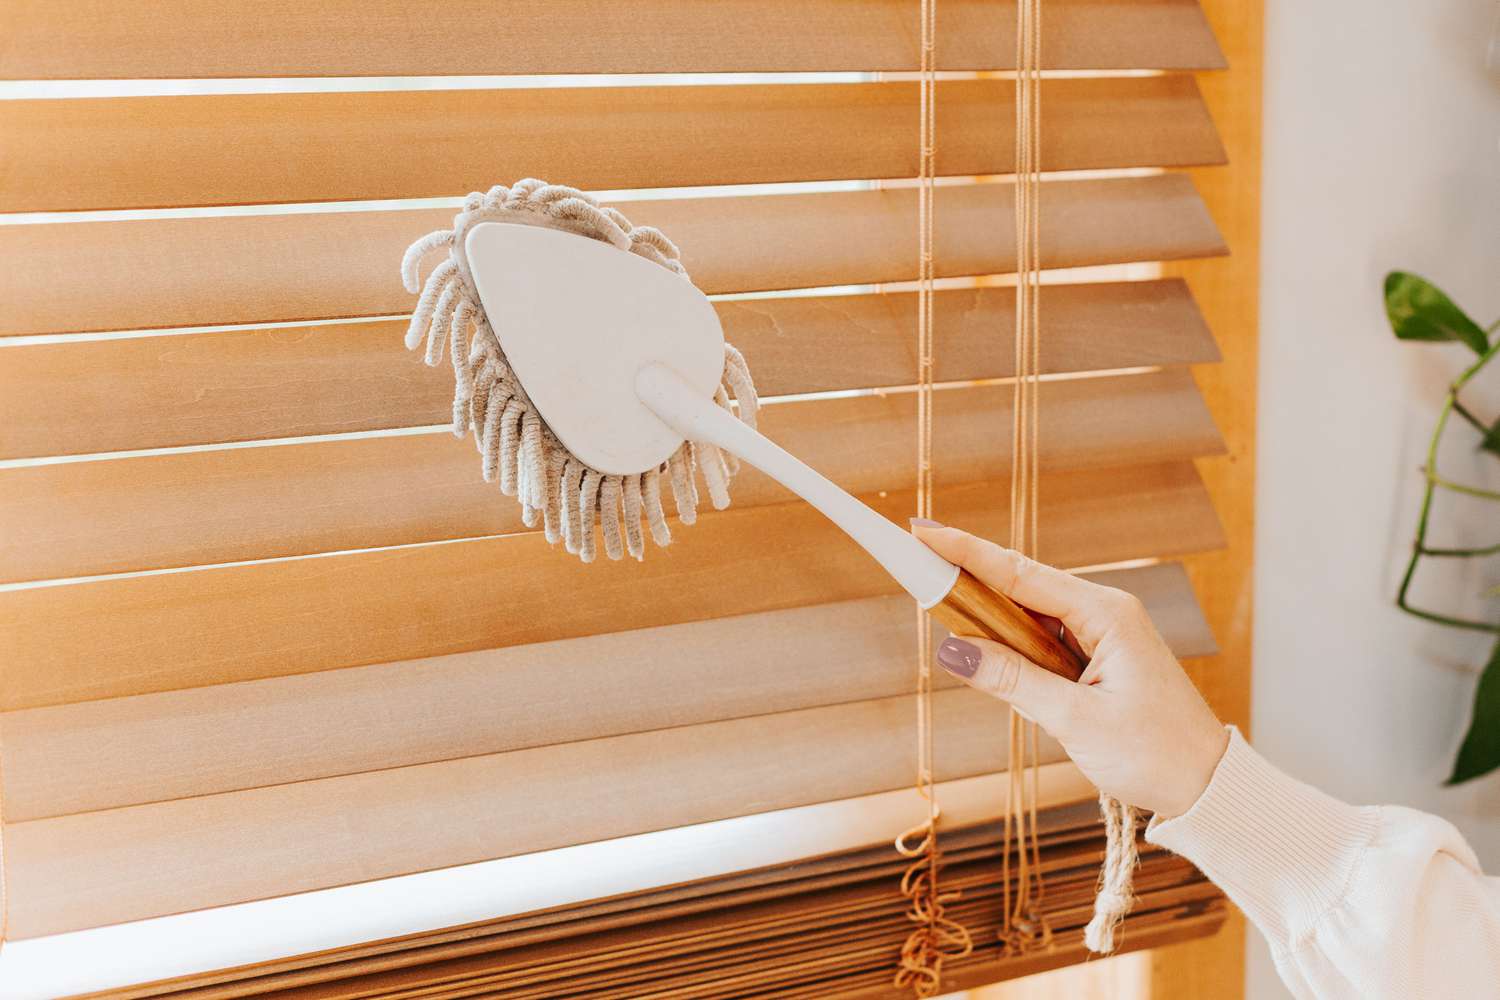 How To Clean Blinds Without Removing Them